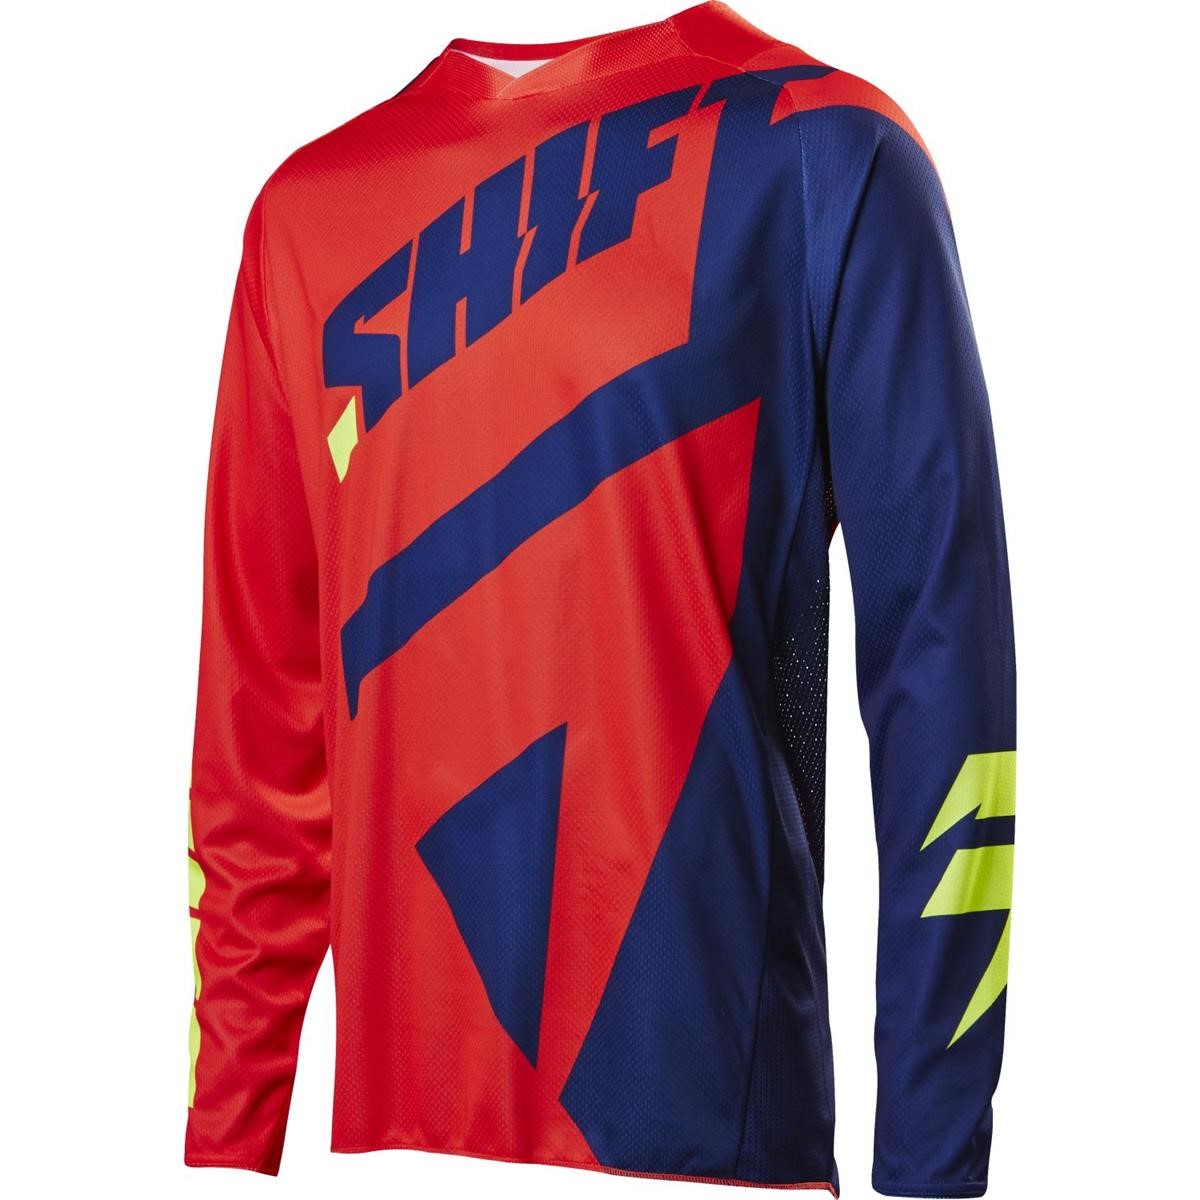 Shift Jersey 3lack Navy/Red - Mainline